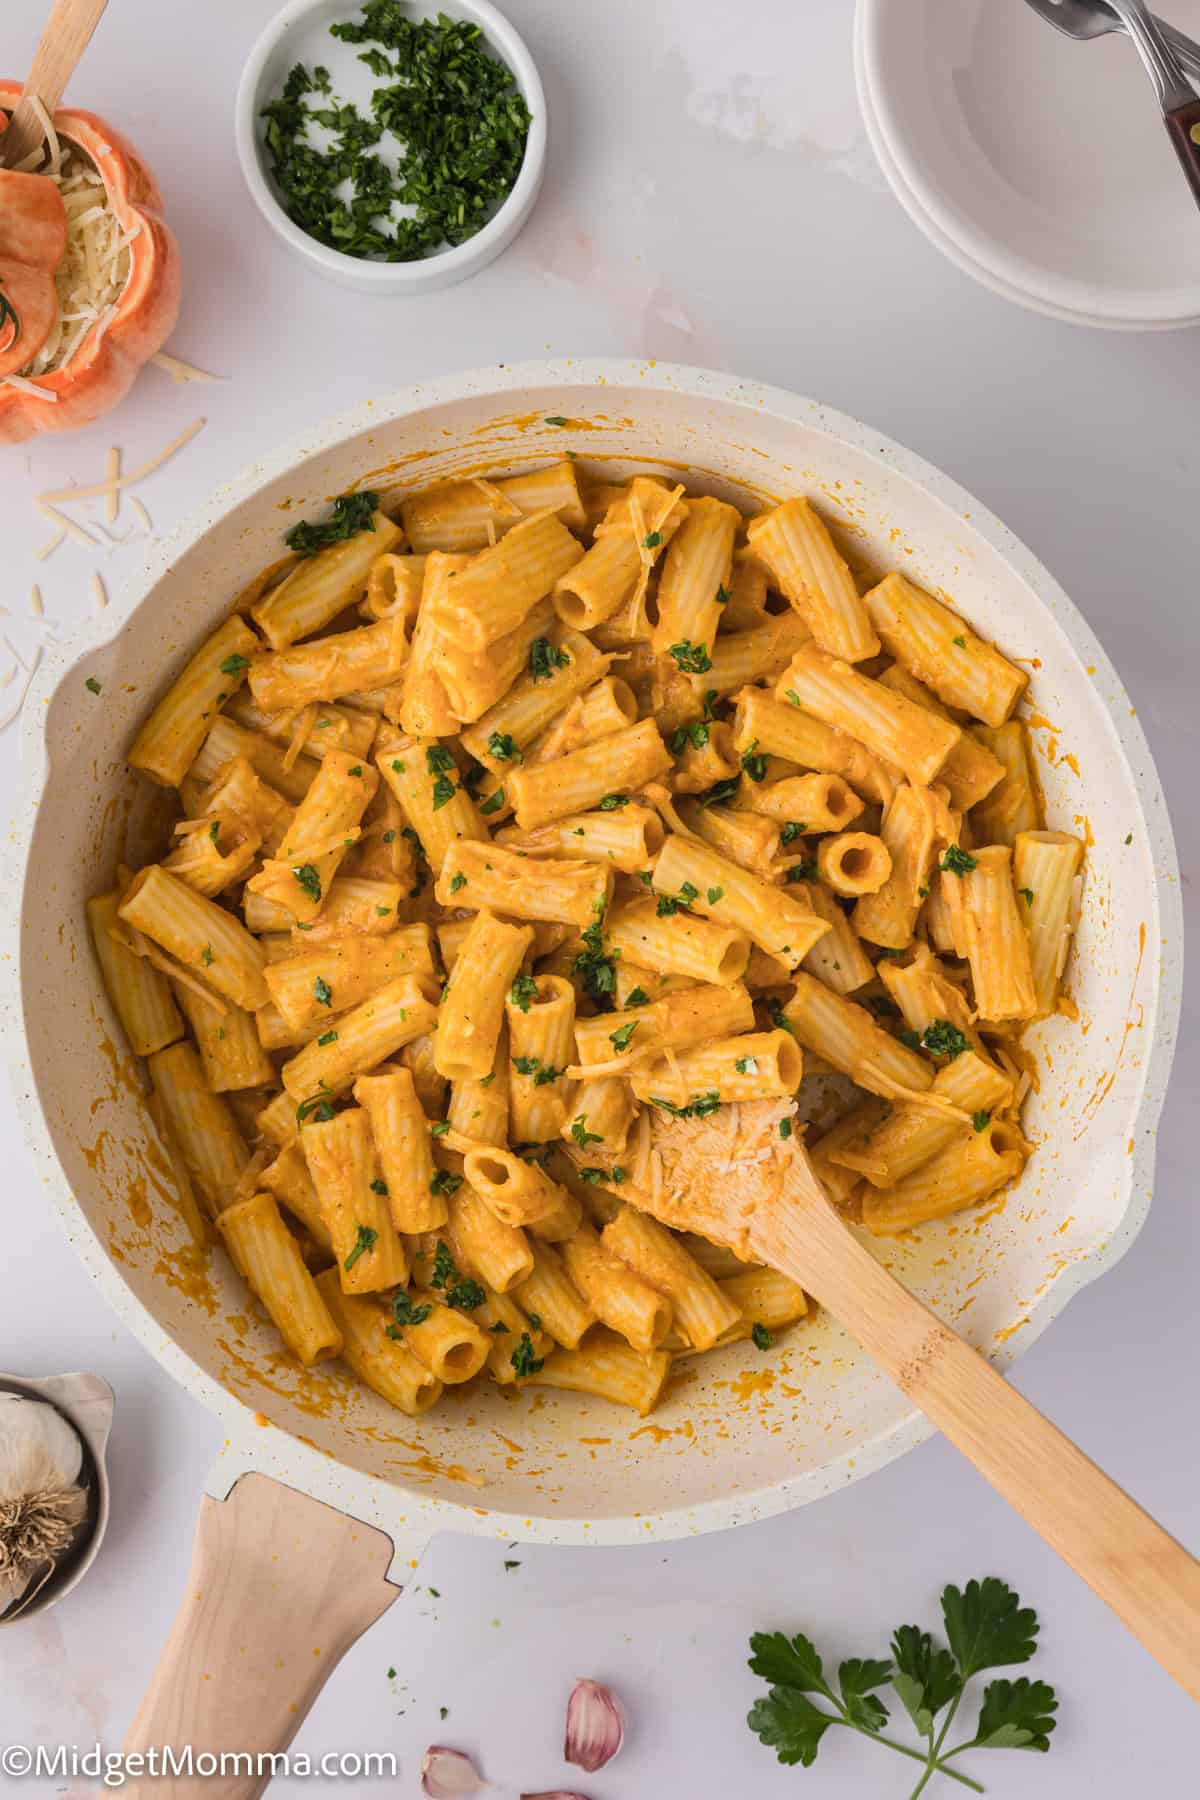 A bowl of pasta topped with a creamy pasta sauce and topped with fresh herbs, surrounded by garlic cloves with a wooden spoon.